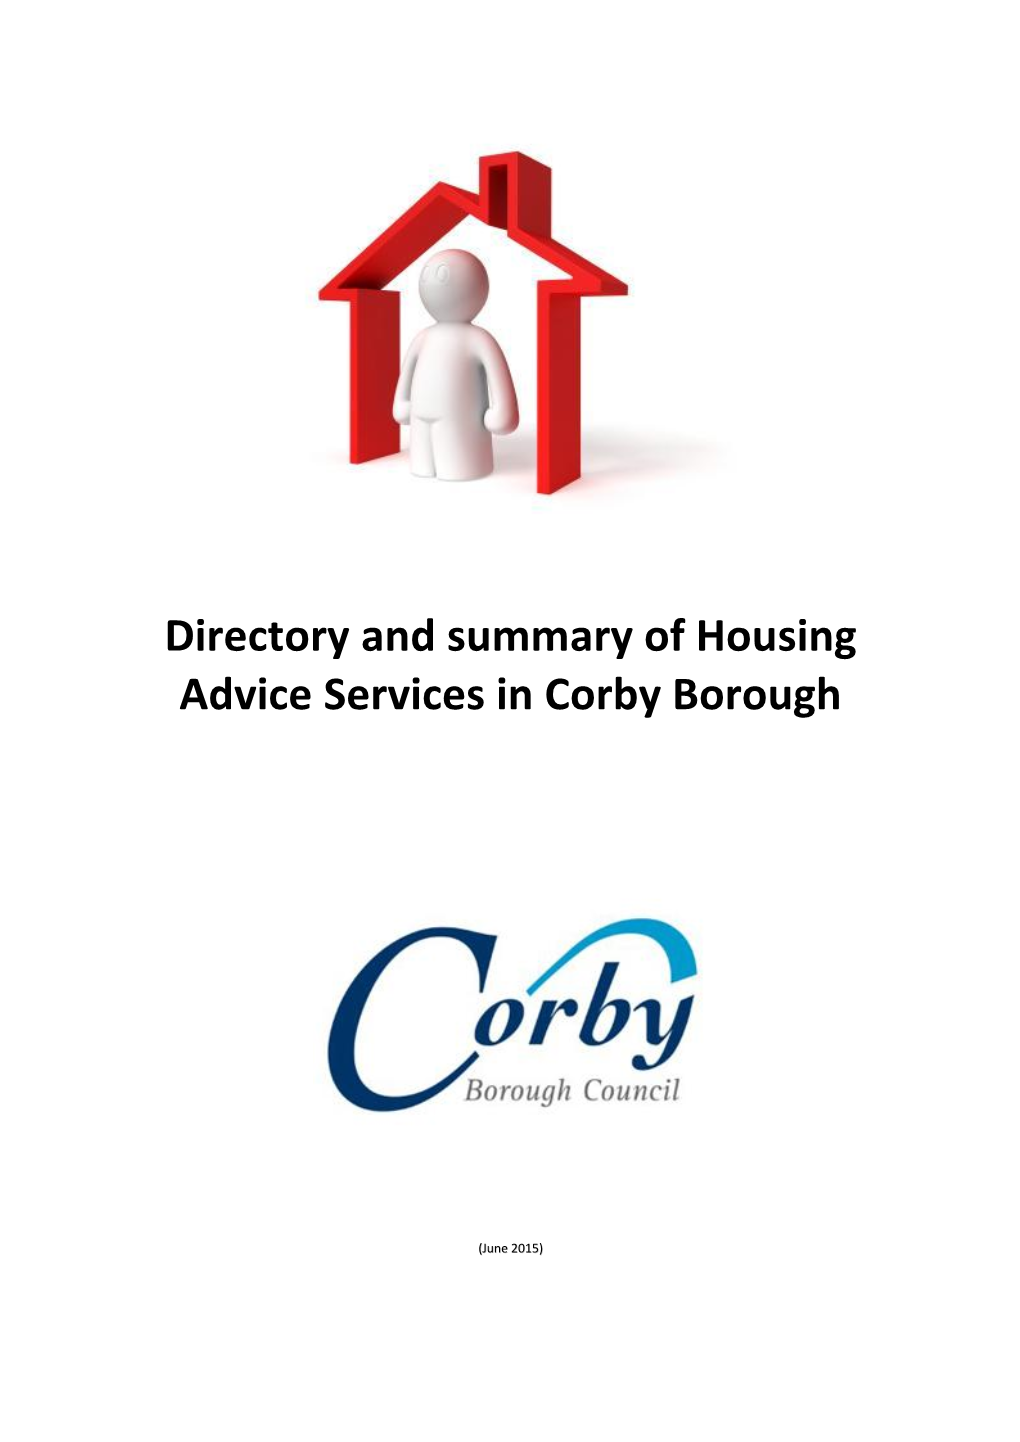 Directory and Summary of Housing Advice Services in Corby Borough